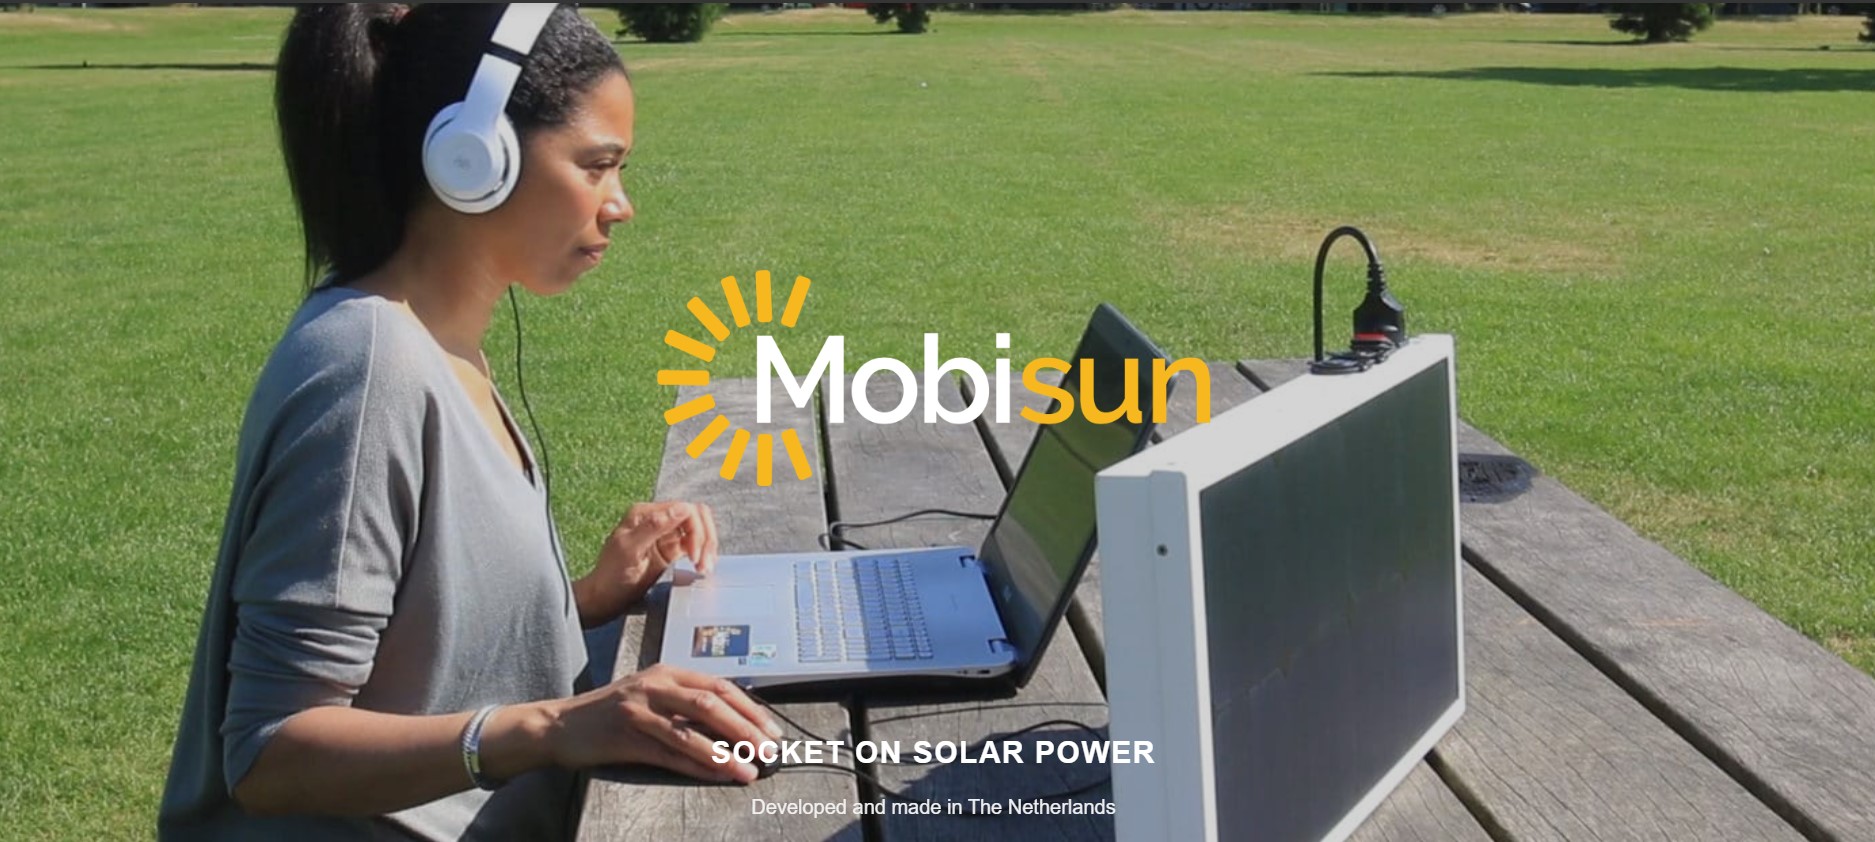 Mobisun pro portable solar panel solar generator charge electric scooter battery with the sun